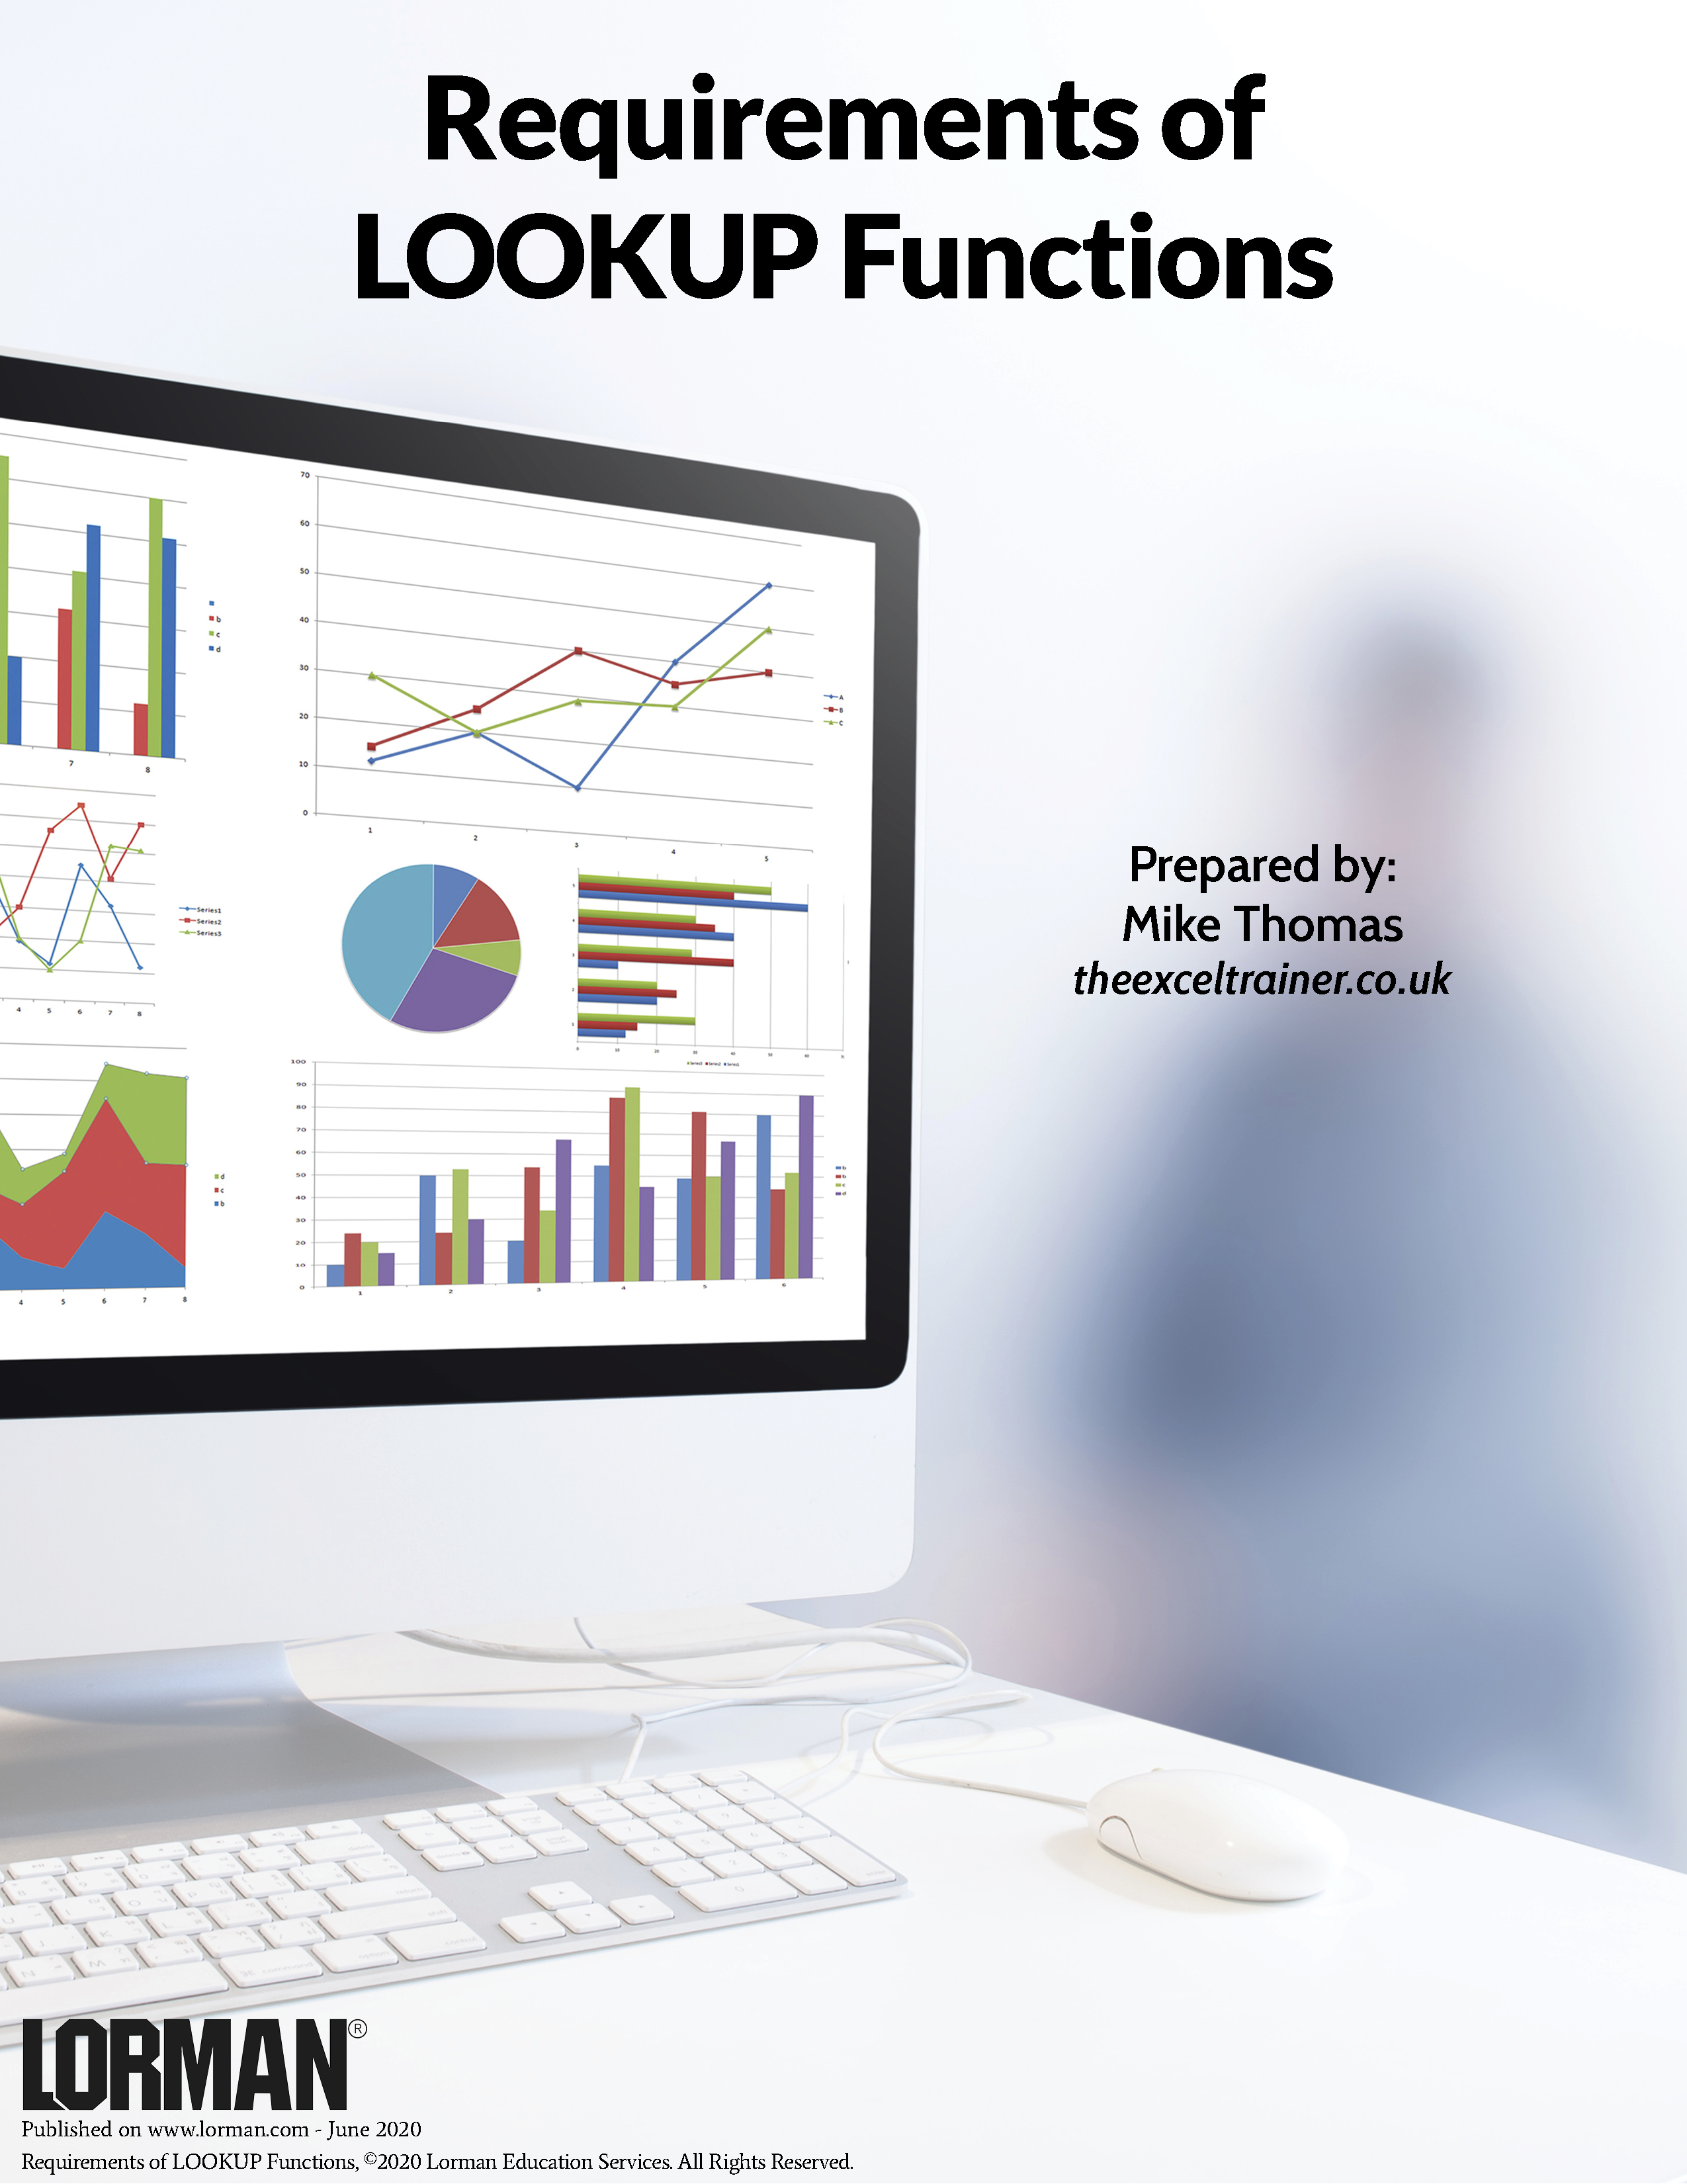 Requirements of LOOKUP Functions